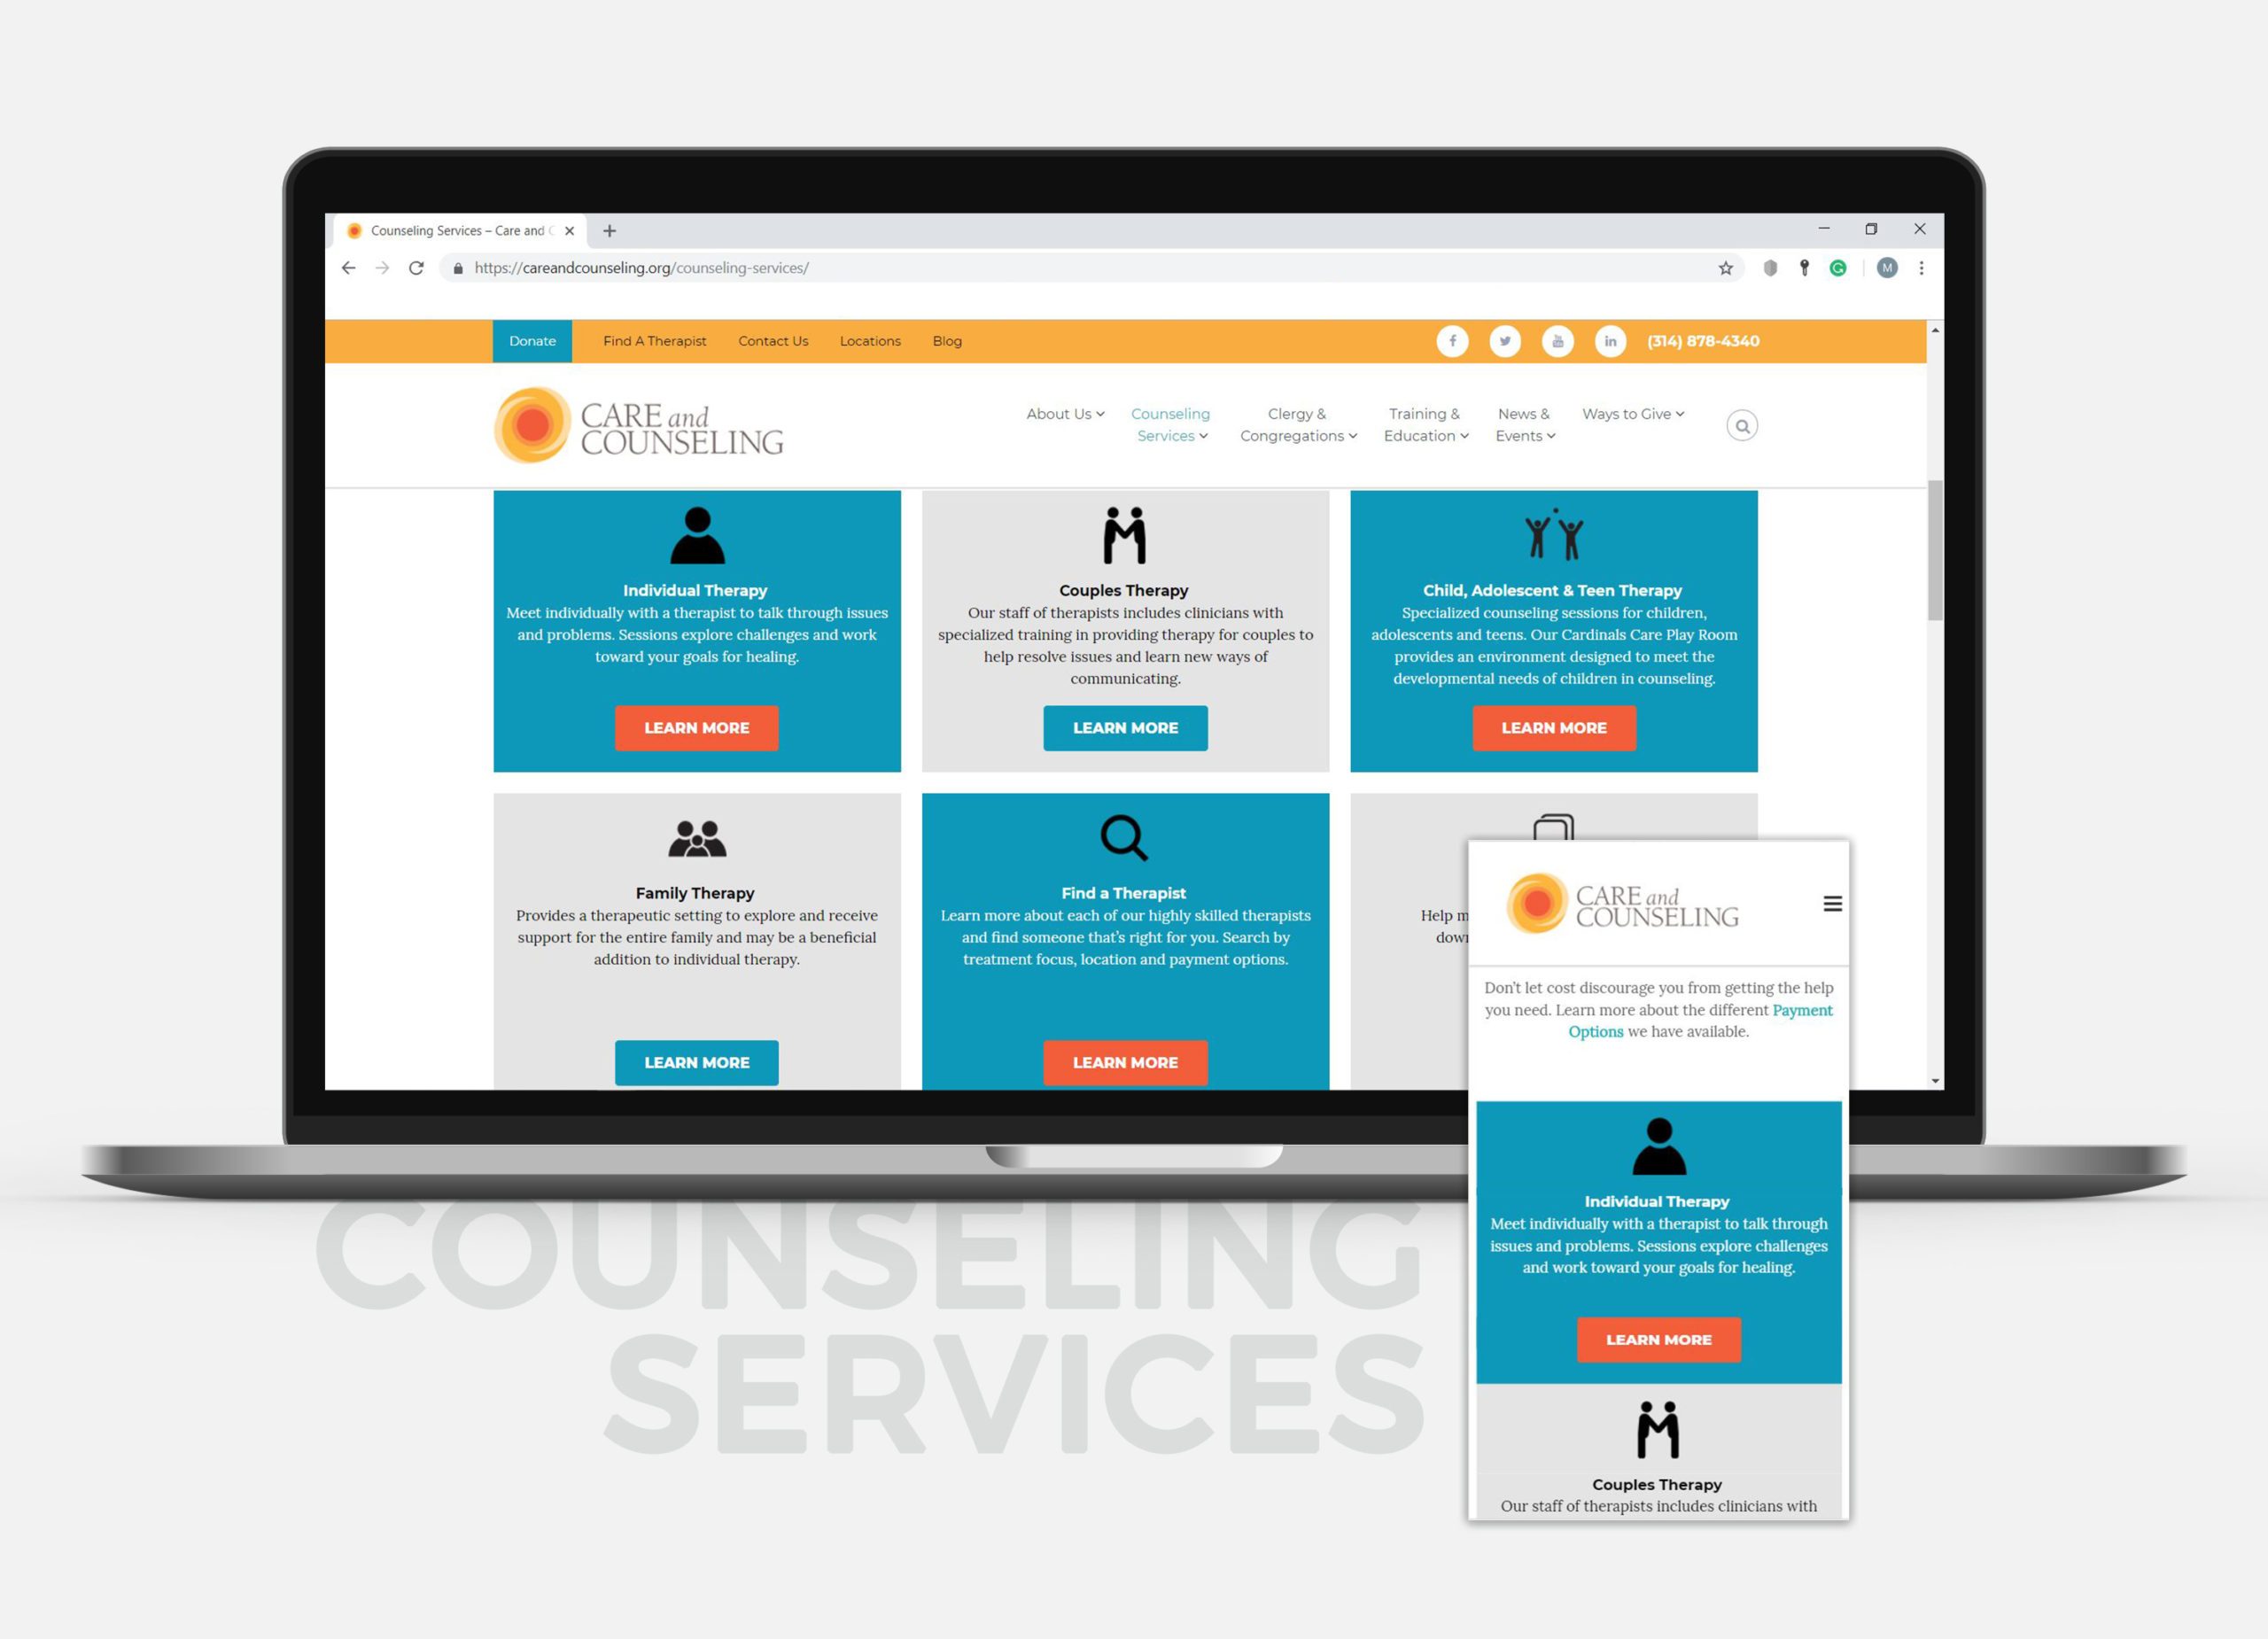 Care and Counseling - Counseling Services Portfolio Image - Designs by Martin Holloway